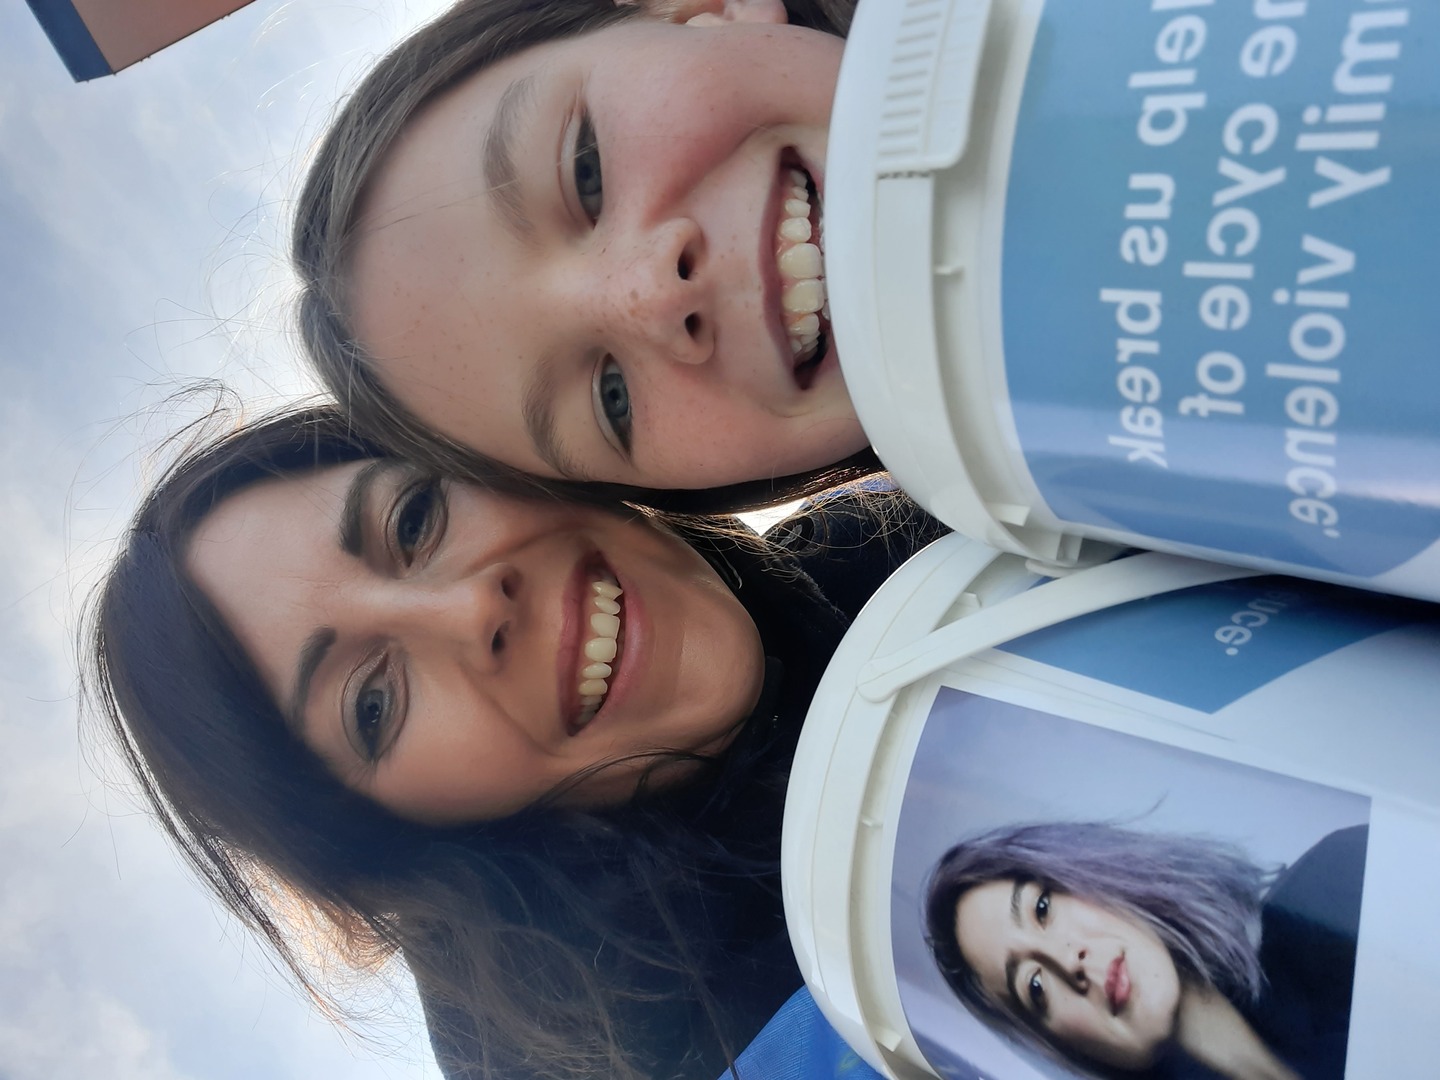 A mother and daughter wearing Aviva vests hold Aviva collection buckets for a selfie.